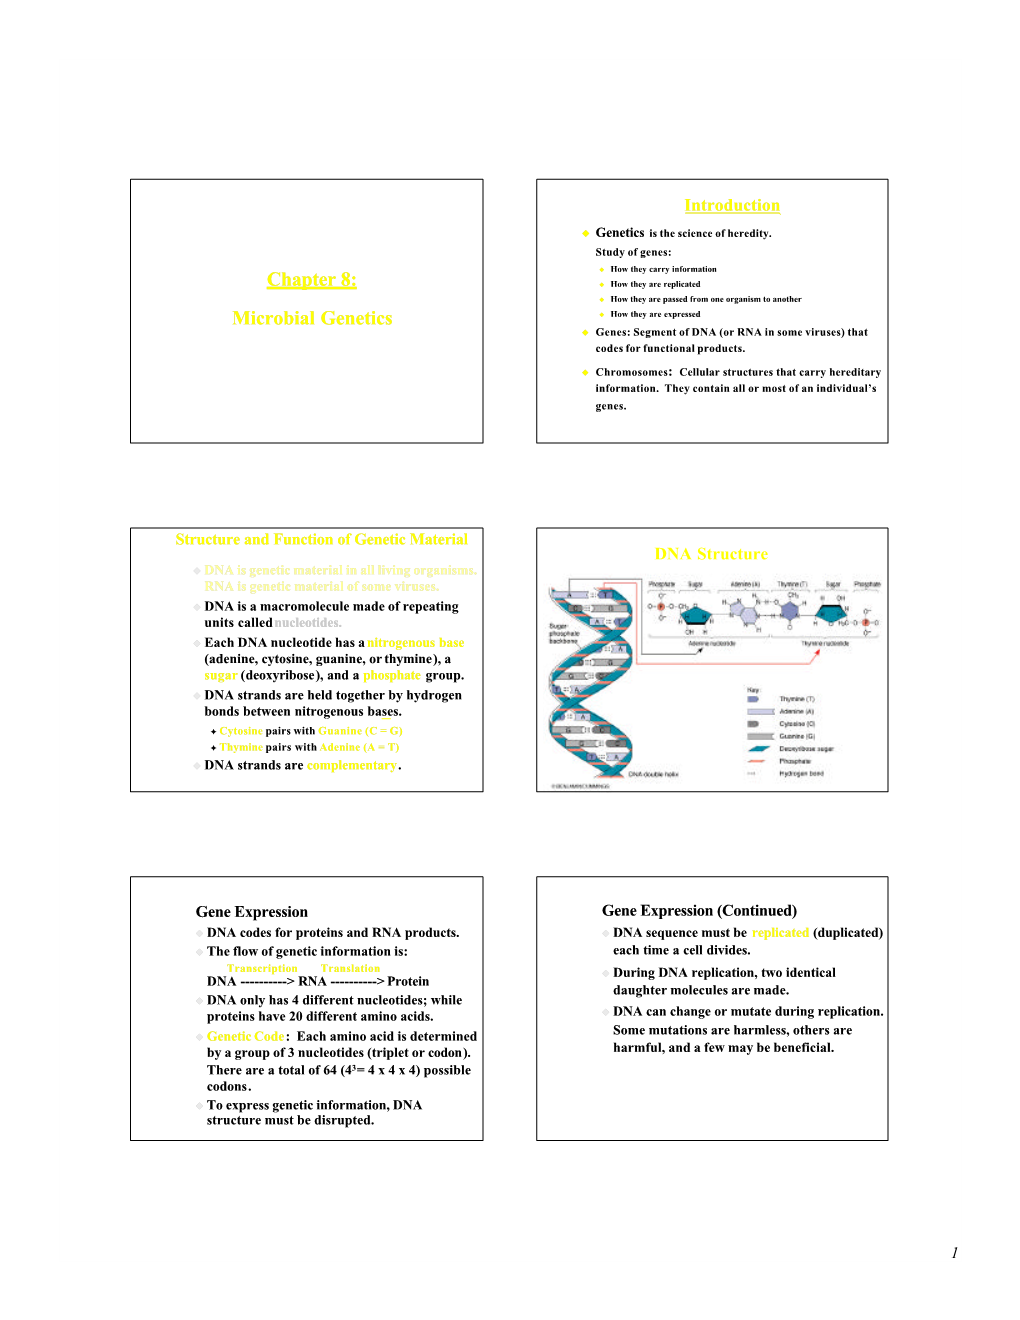 Chapter 8: Microbial Genetics